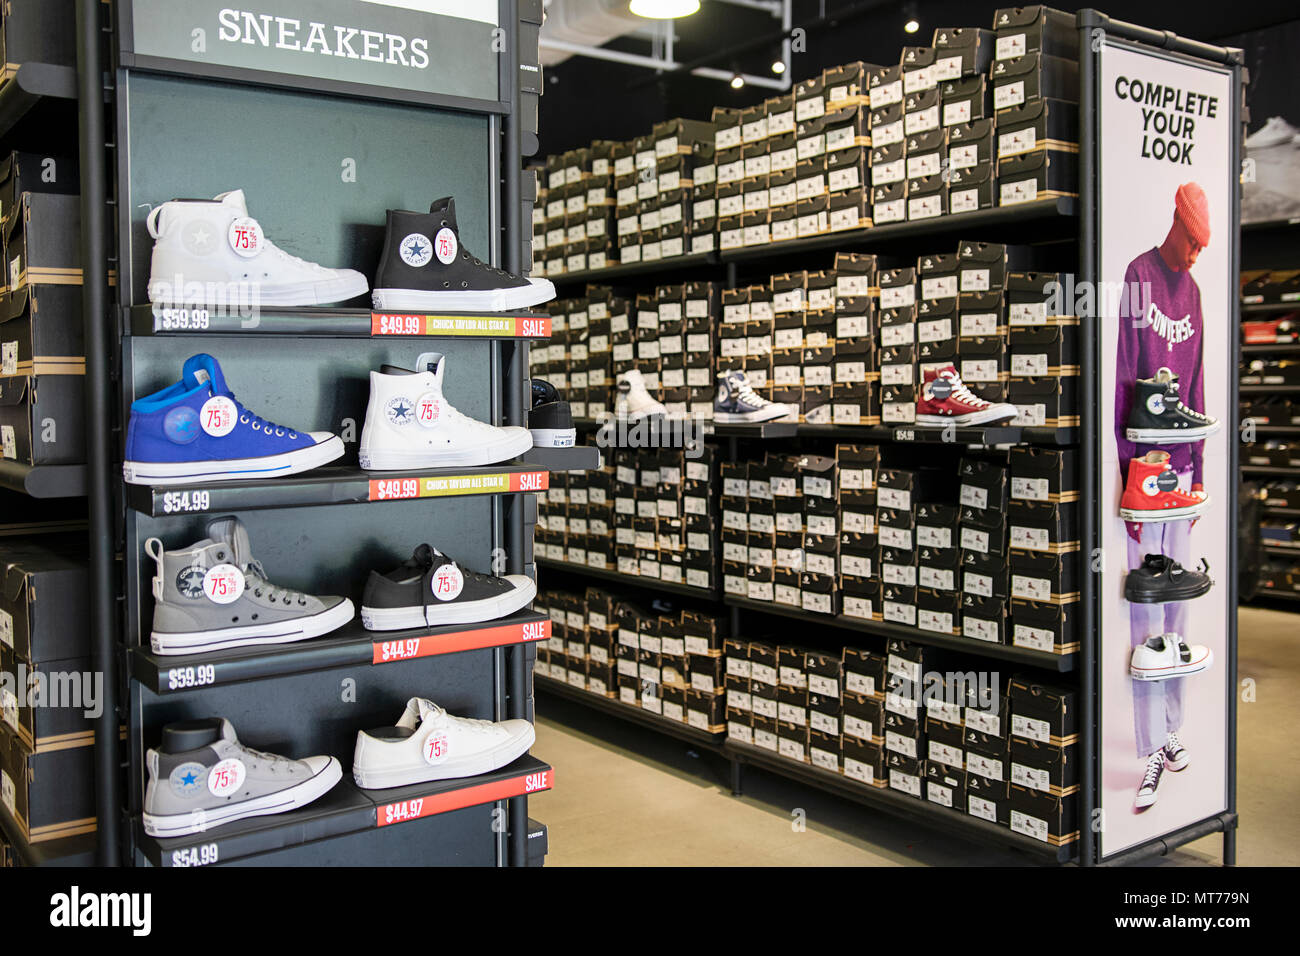 converse outlet store - 60% OFF - awi.com